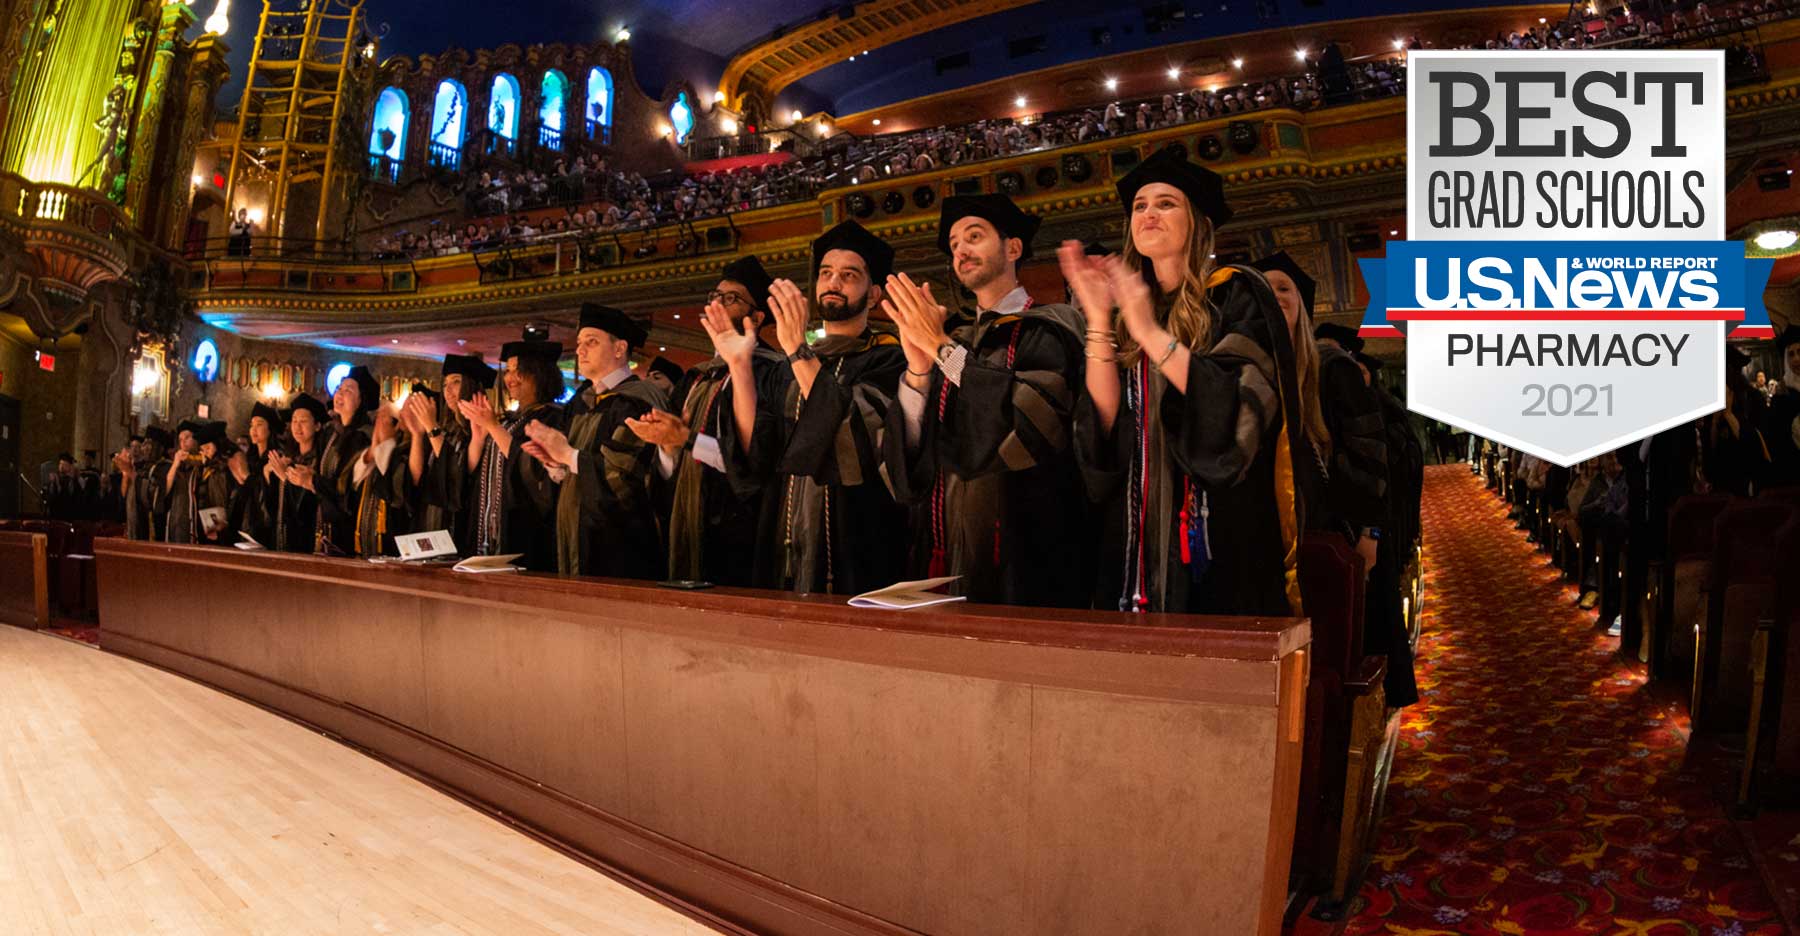 pharmacy student graduates standing and clapping at their graduation ceremony alongside a u.s. news and world reports banner ranking v.c.u. school of pharmacy as a best grad school for 2021